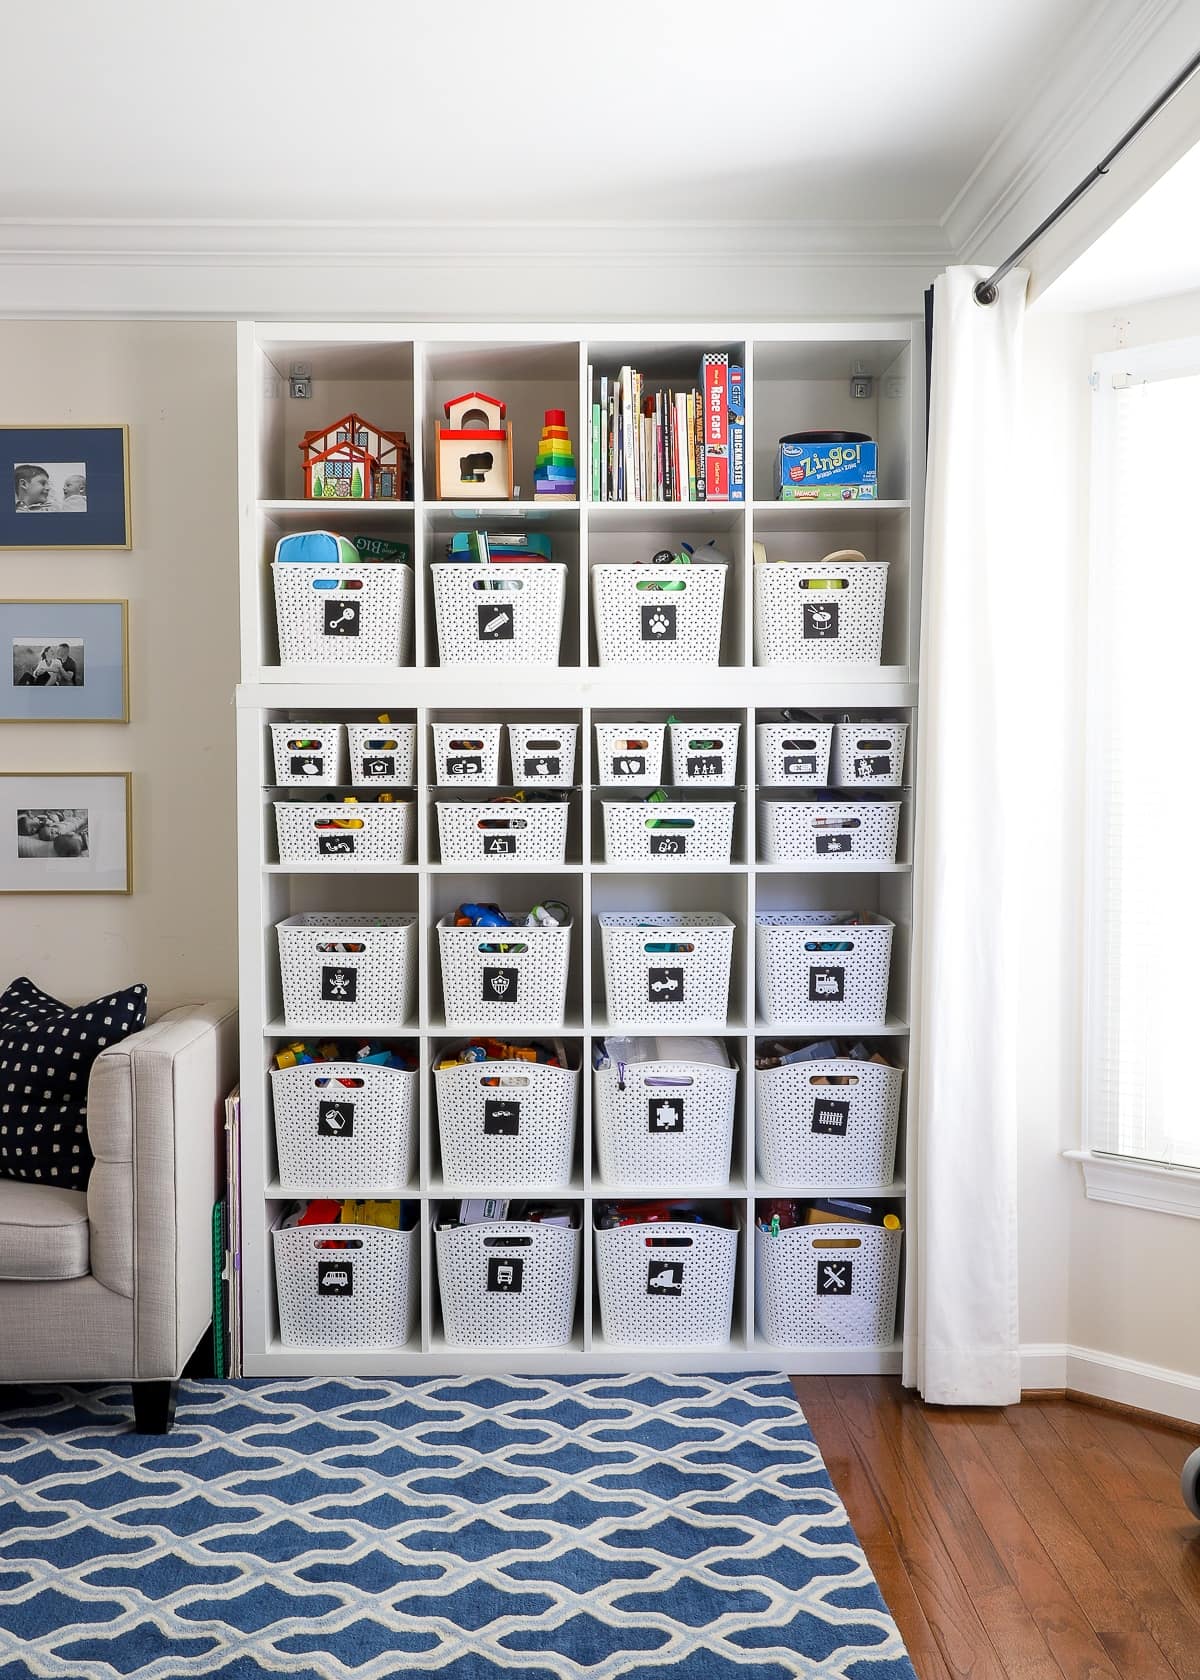 30 BEST PLAYROOM ORGANIZATION IDEAS FOR A MORE BEAUTIFUL